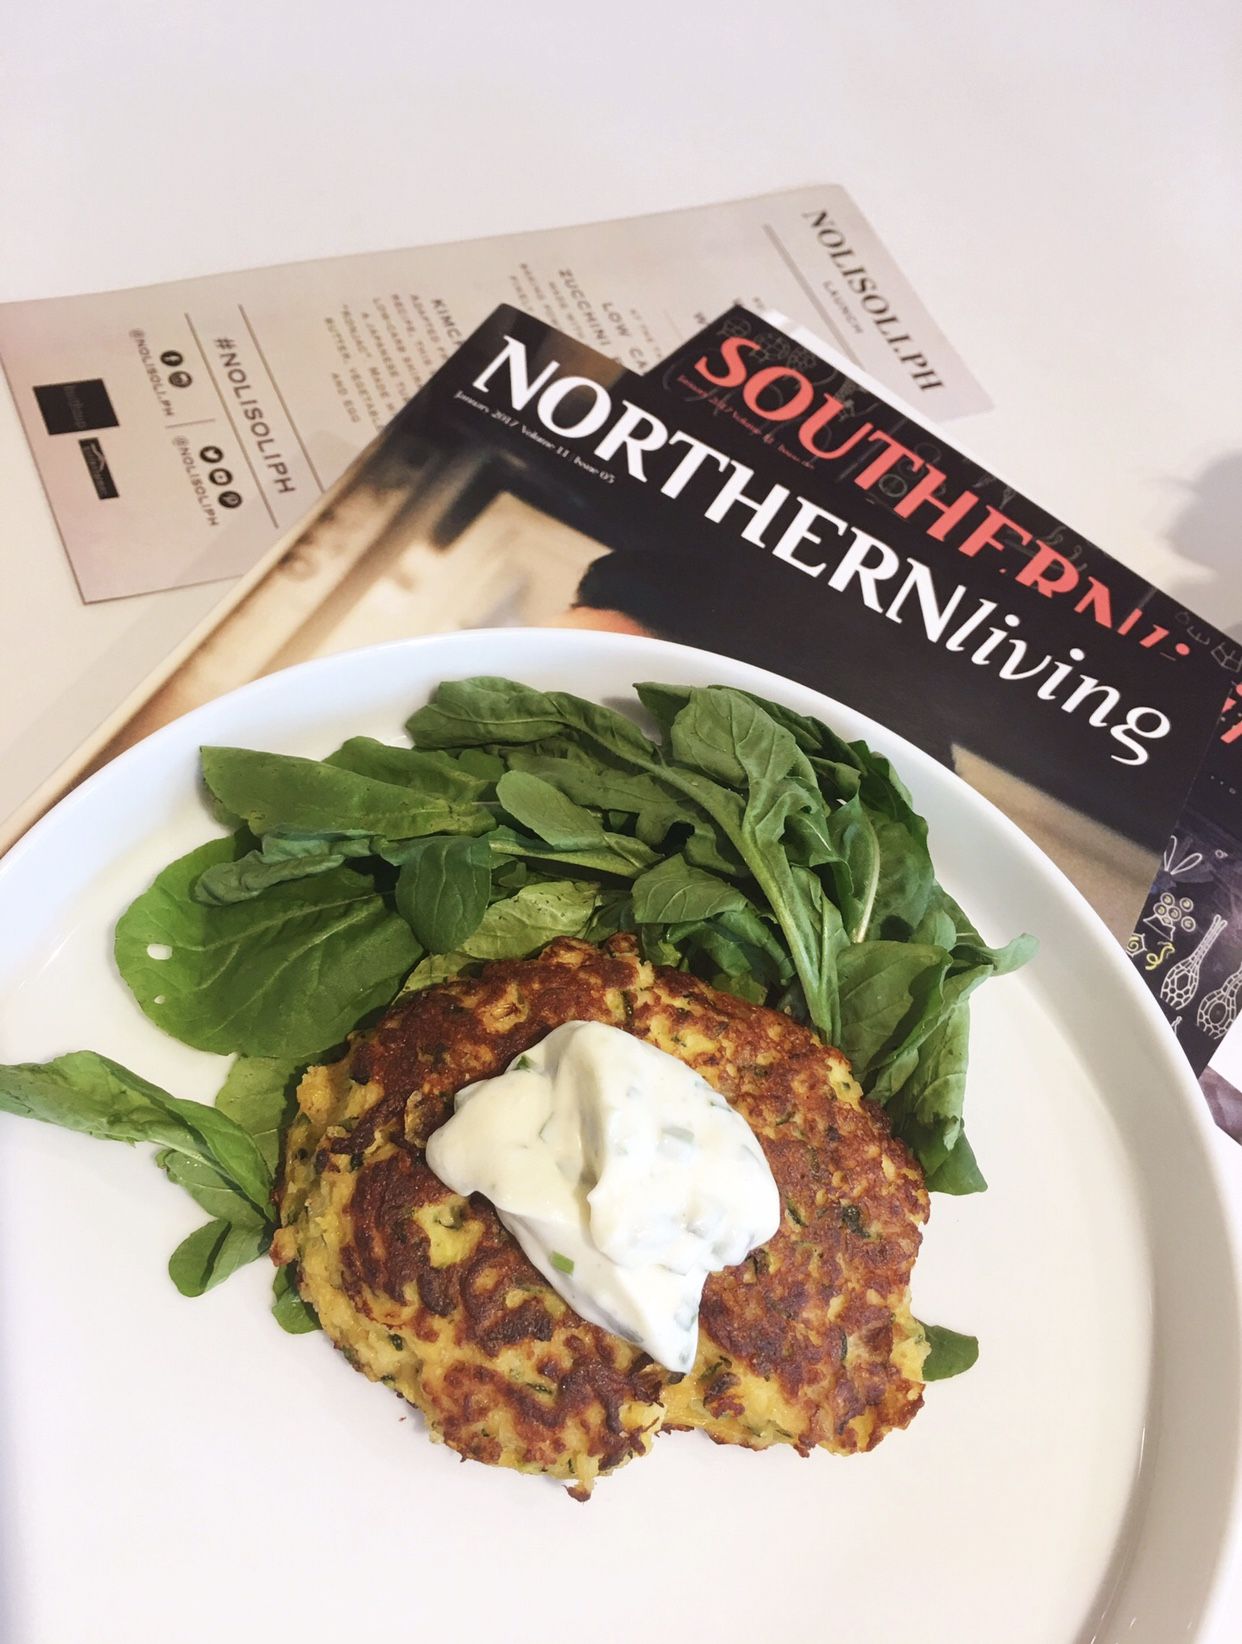 Bea's low carb zucchini fritters.